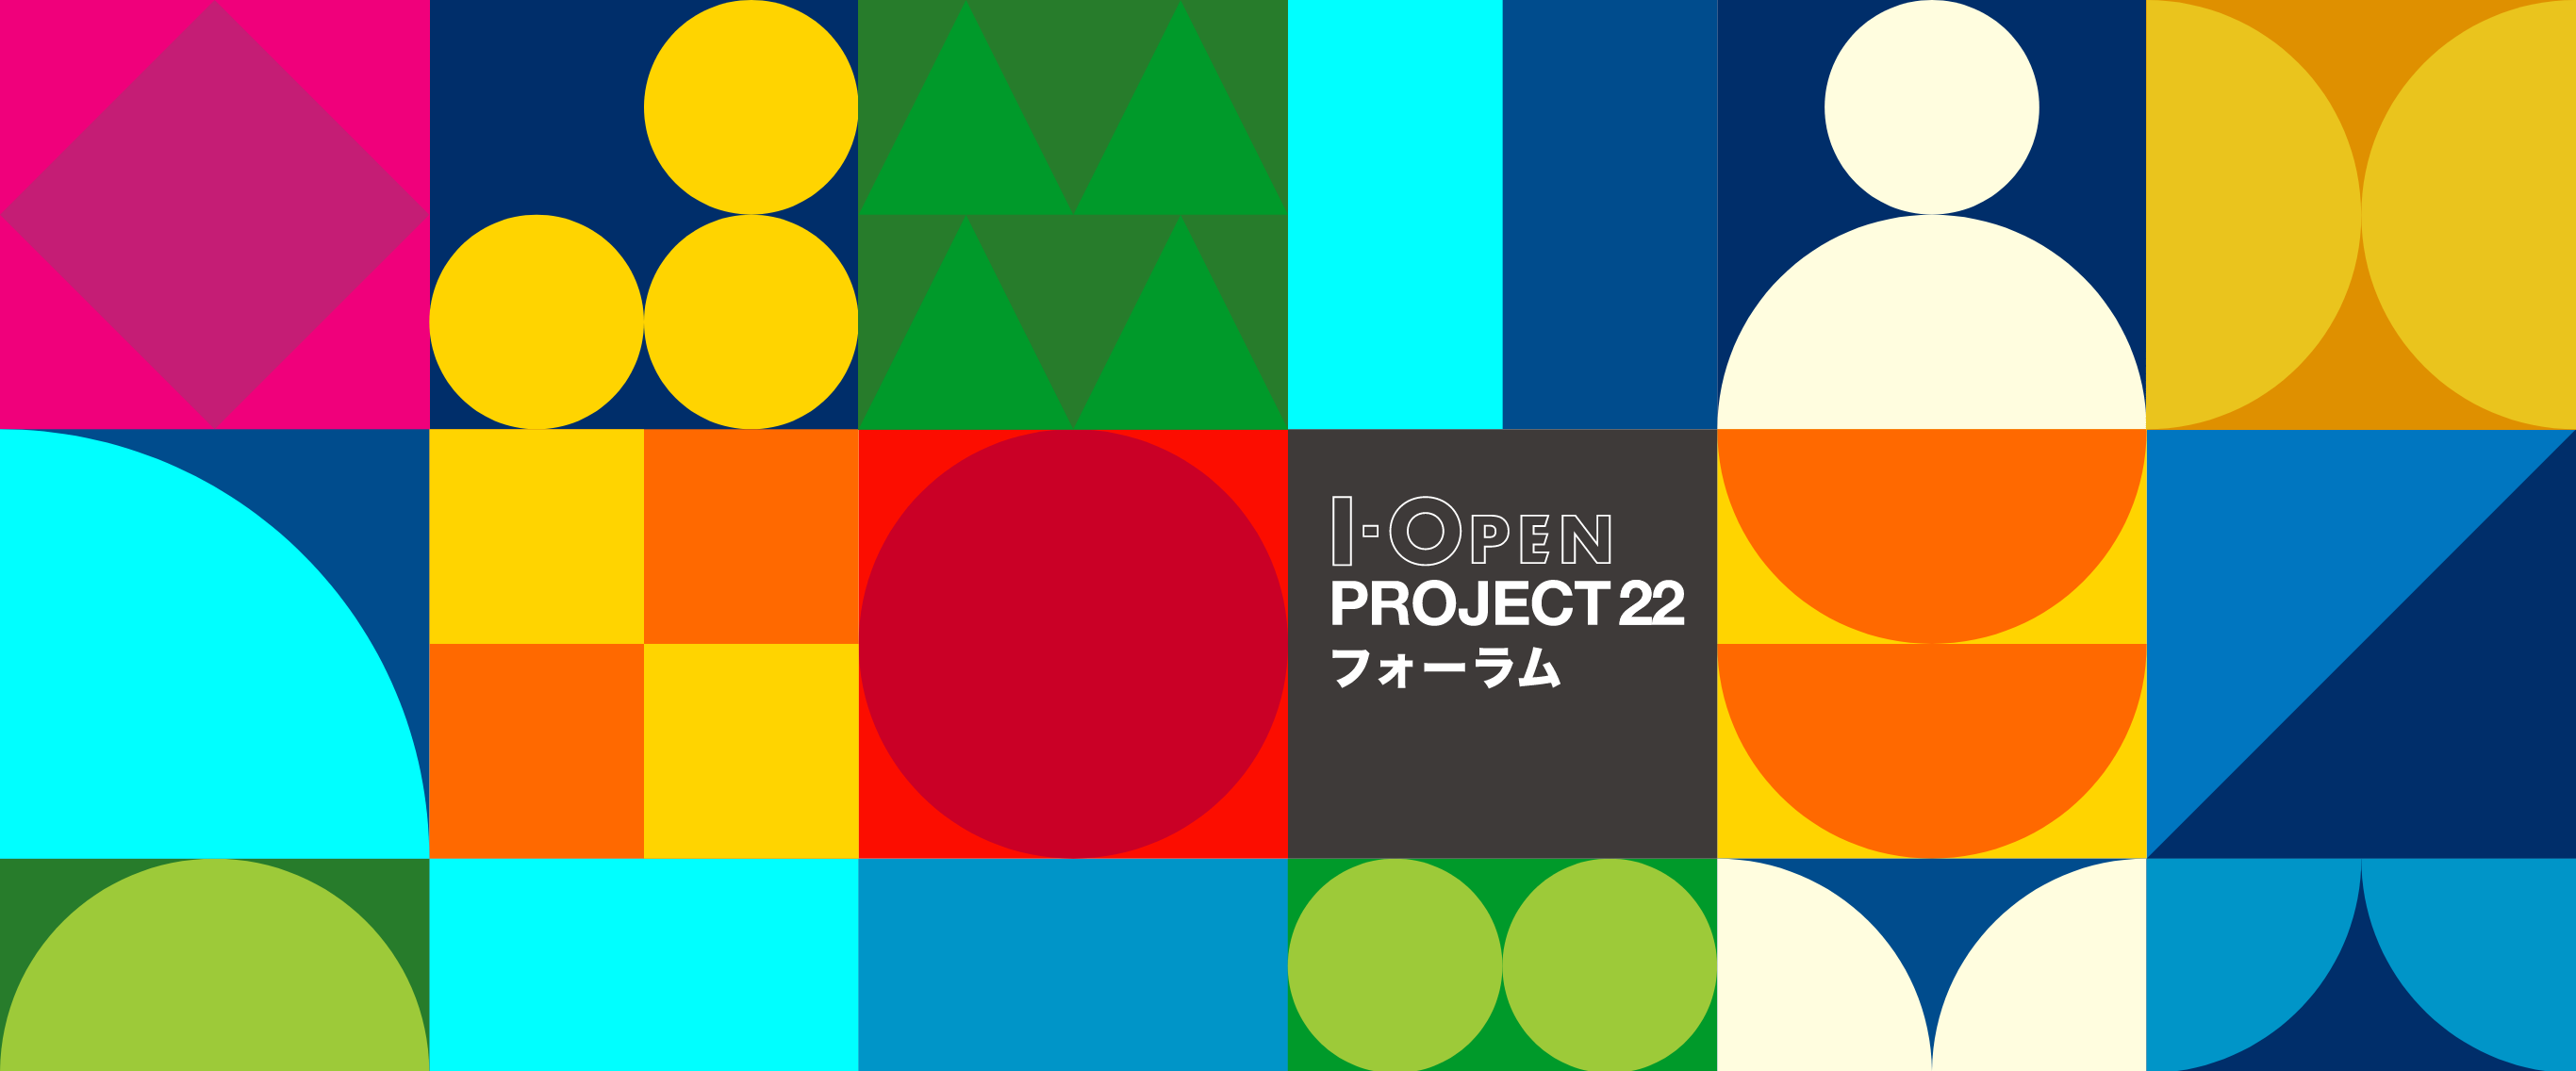 I-OPEN PROJECT21 フォーラム 2022.3.3 18:30-20:30